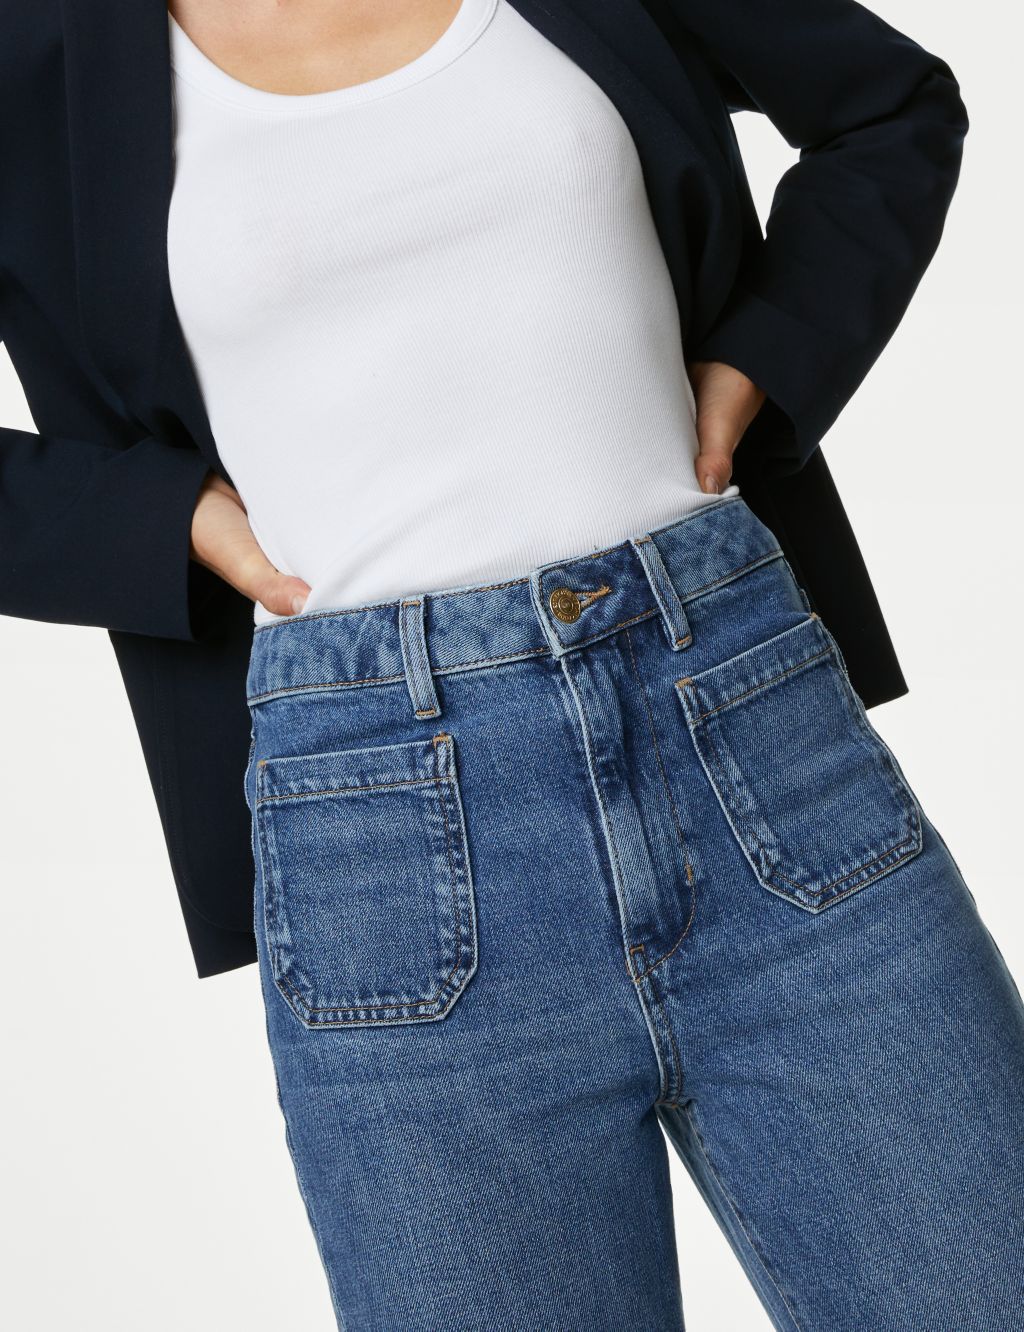 Patch Pocket Flare High Waisted Jeans image 2